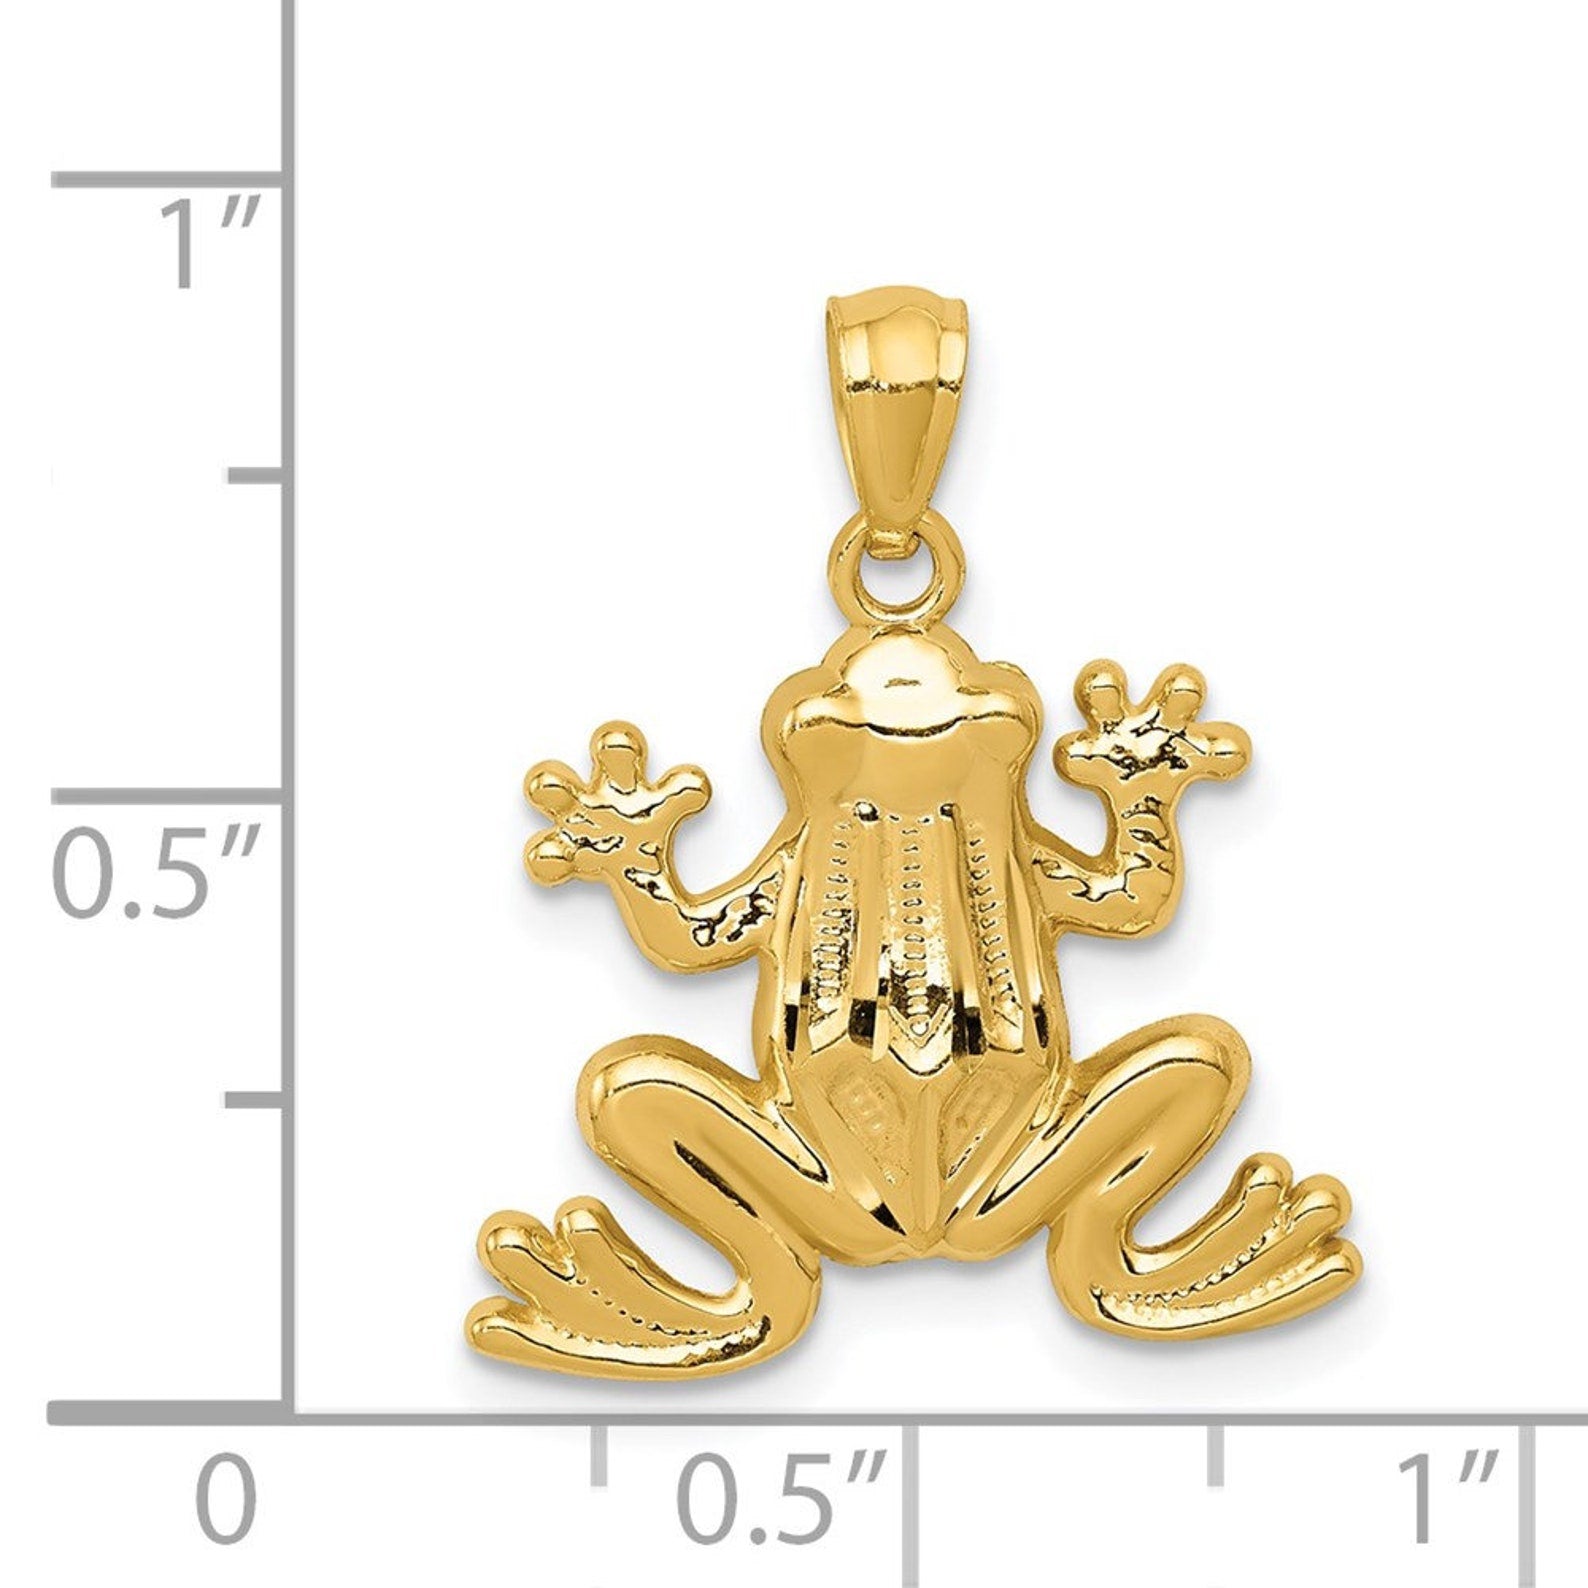 Gold Polished Frog Charm Model-C4038 - Charlie & Co. Jewelry